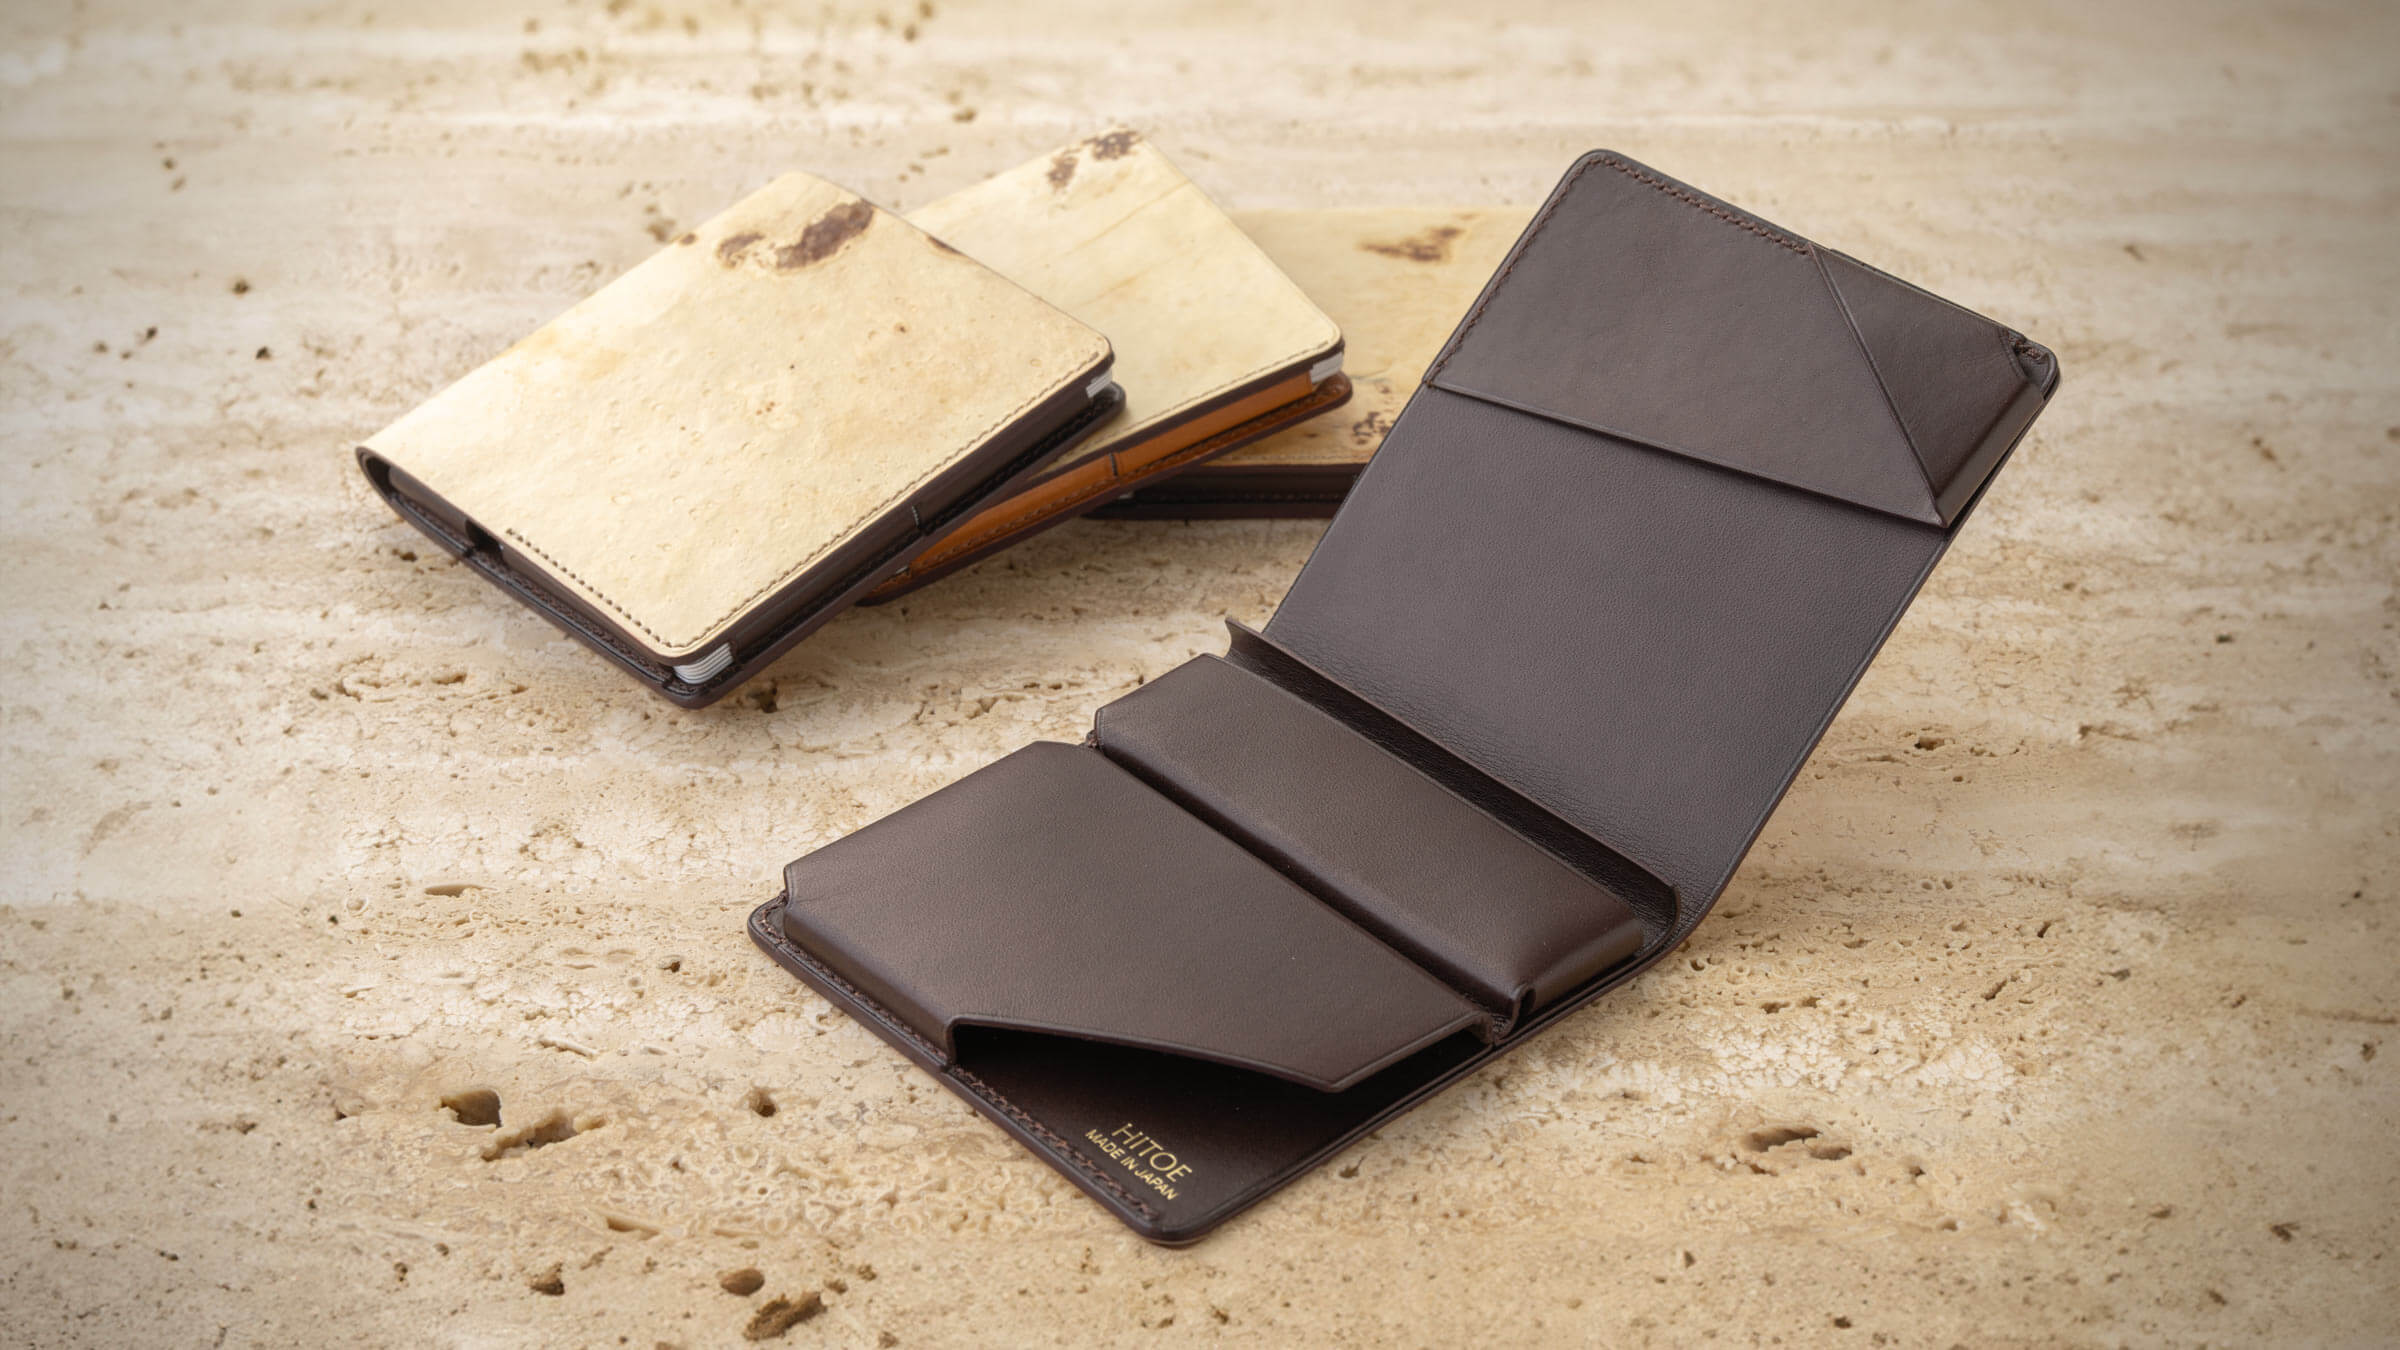 Thin wallets with minimalism at its finest. | SYRINX